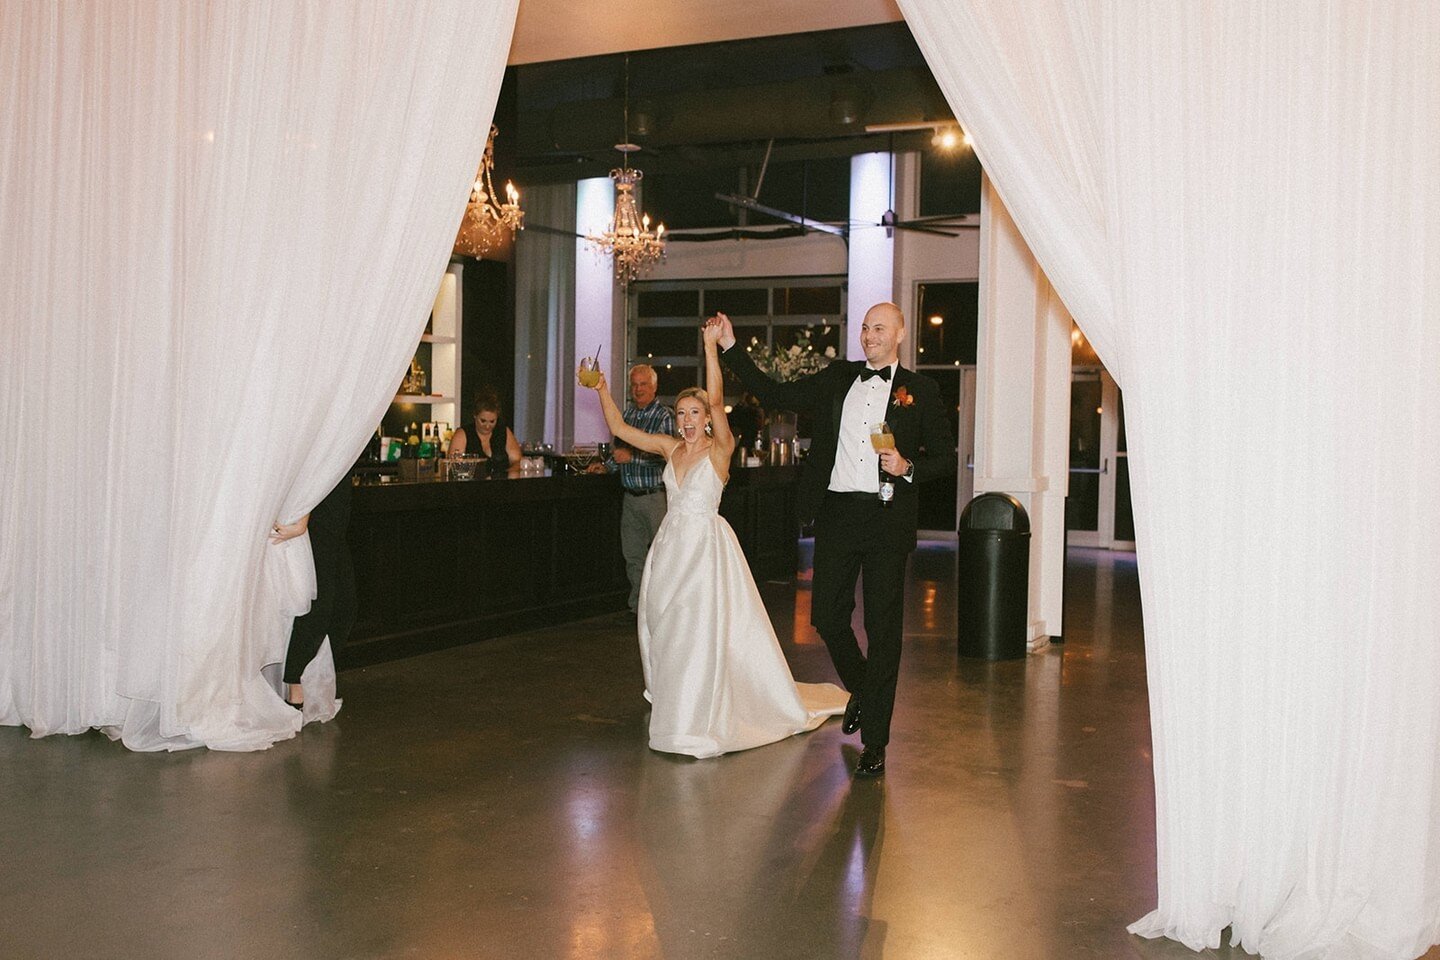 ✨A jaw-dropping grand entrance for the beautiful newlyweds✨⁠
⁠
Discover the possibilities of your event at our venue when you schedule a tour with one of our Expert Event Managers today.✨⁠
⁠
Photographer | @brookeconferphoto